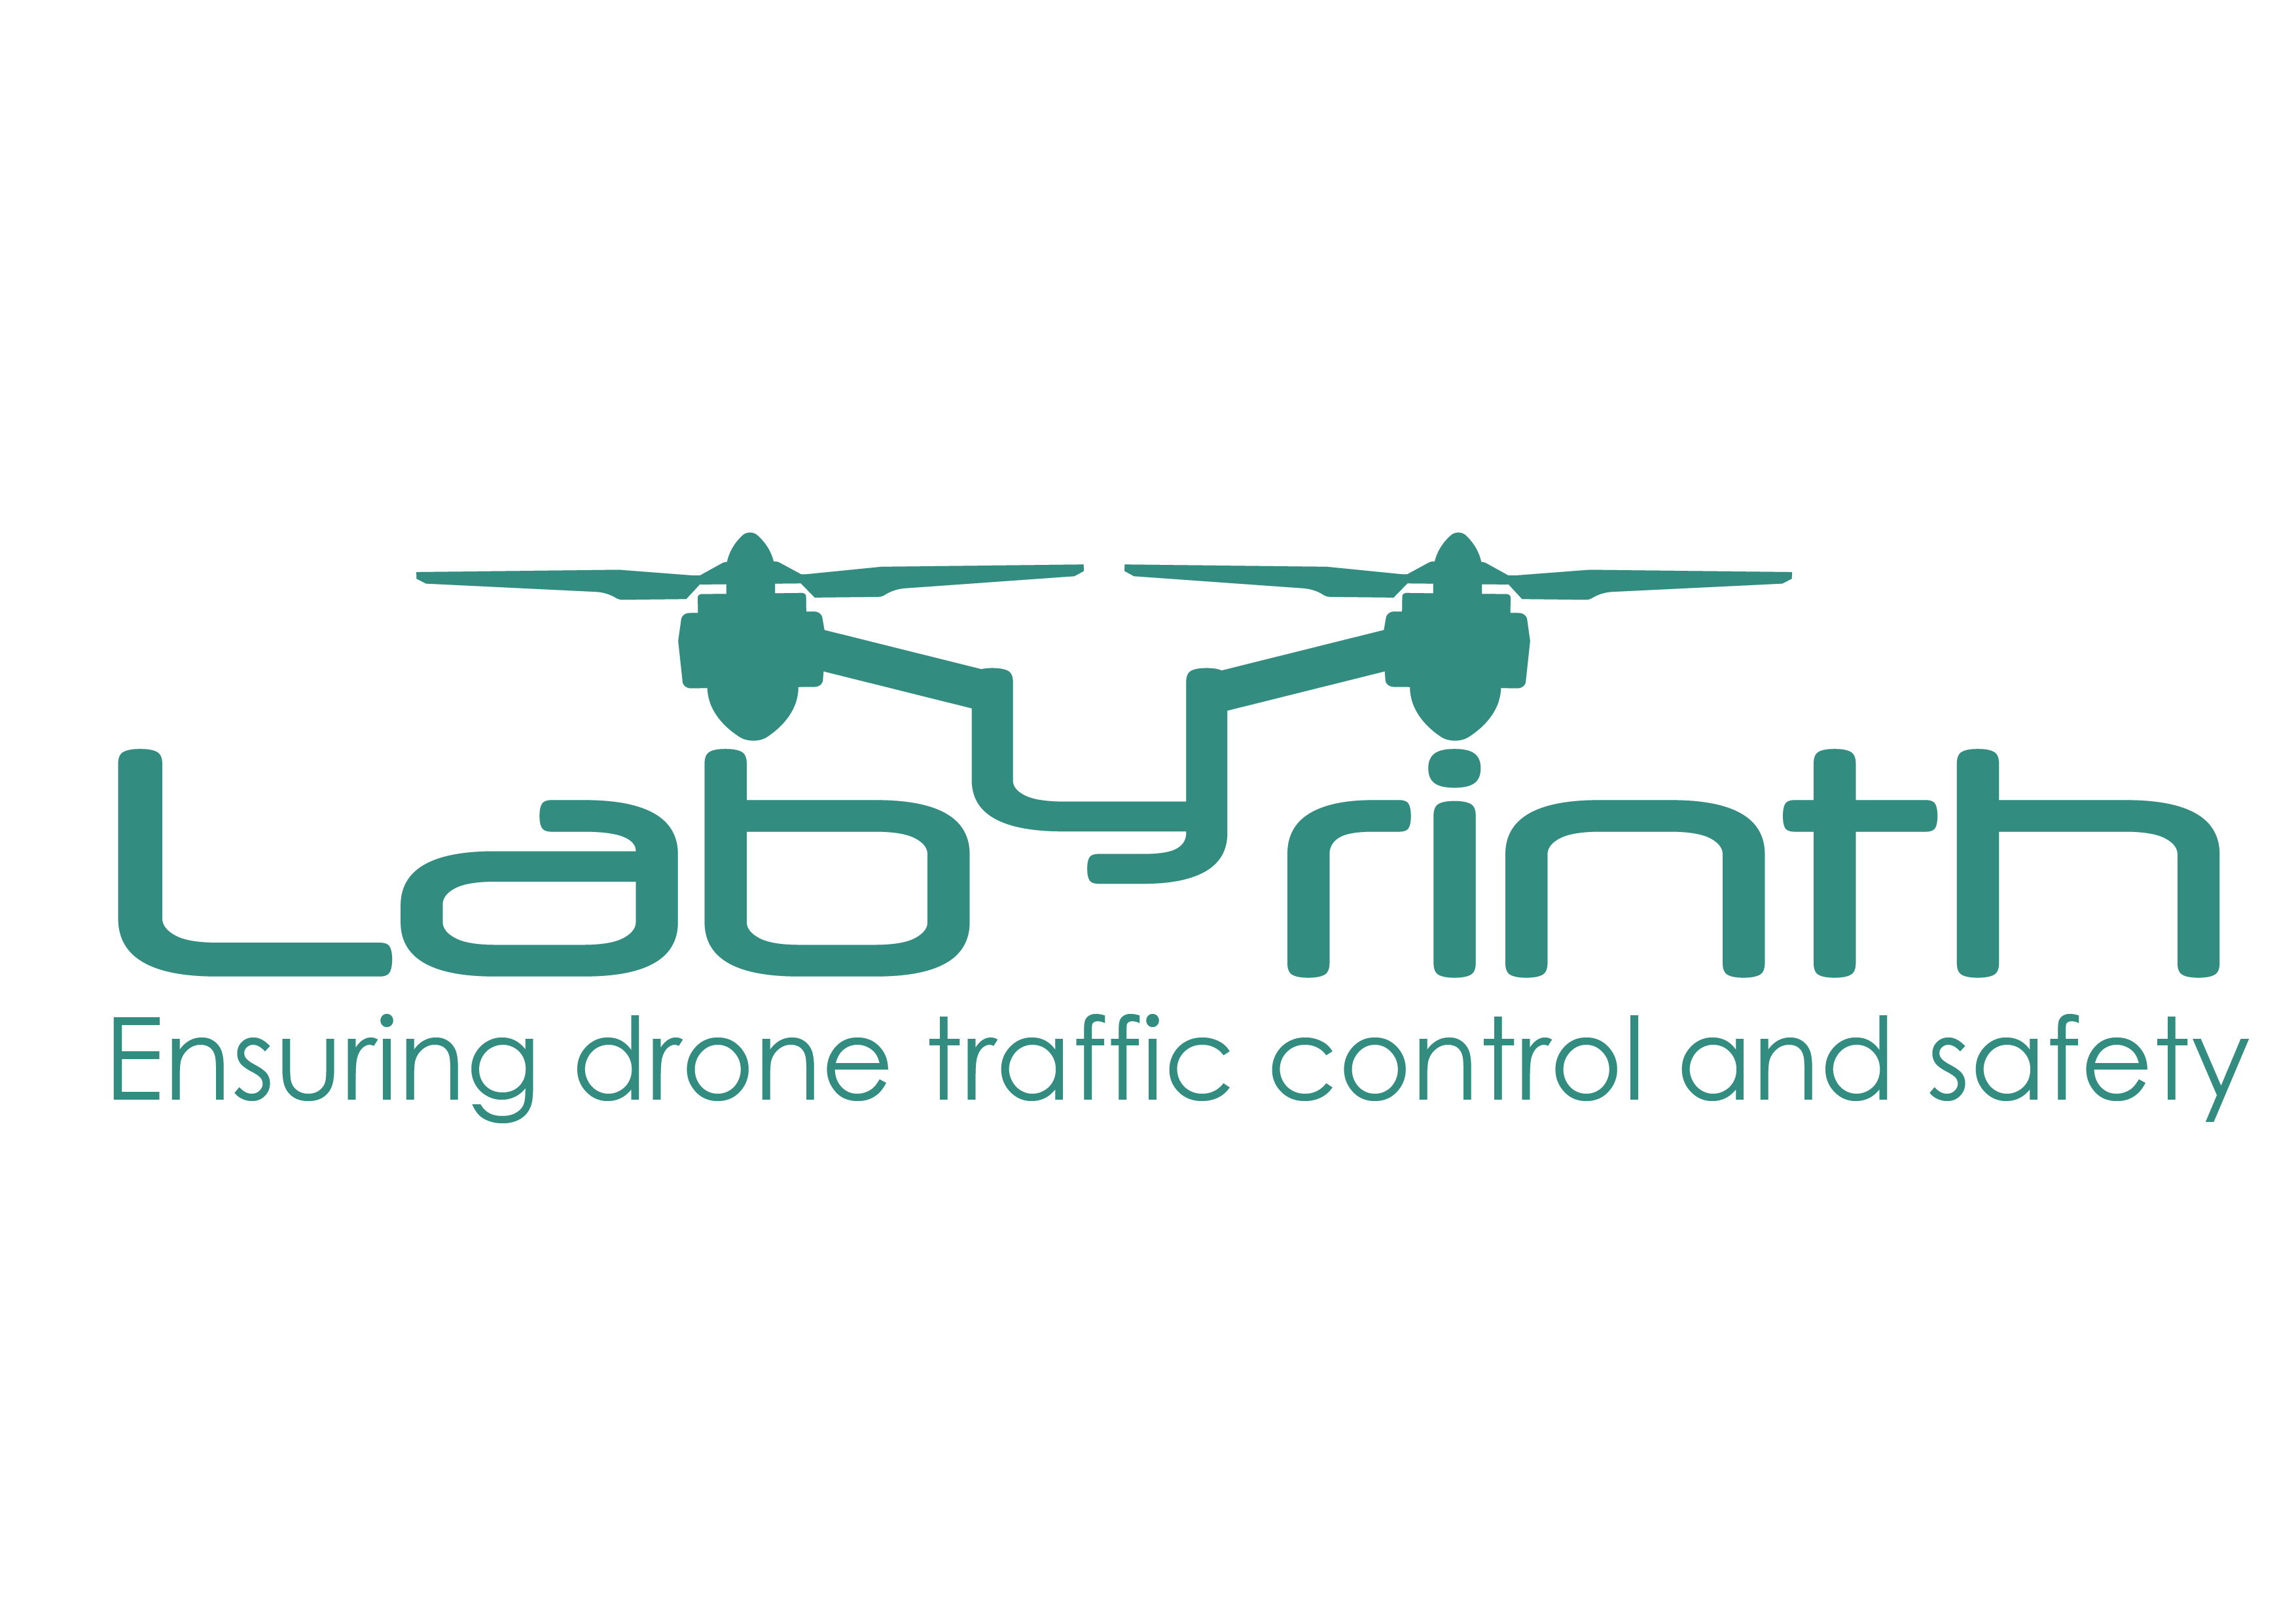 Logo LABYRINTH (Ensuring drone traficc control and safety)